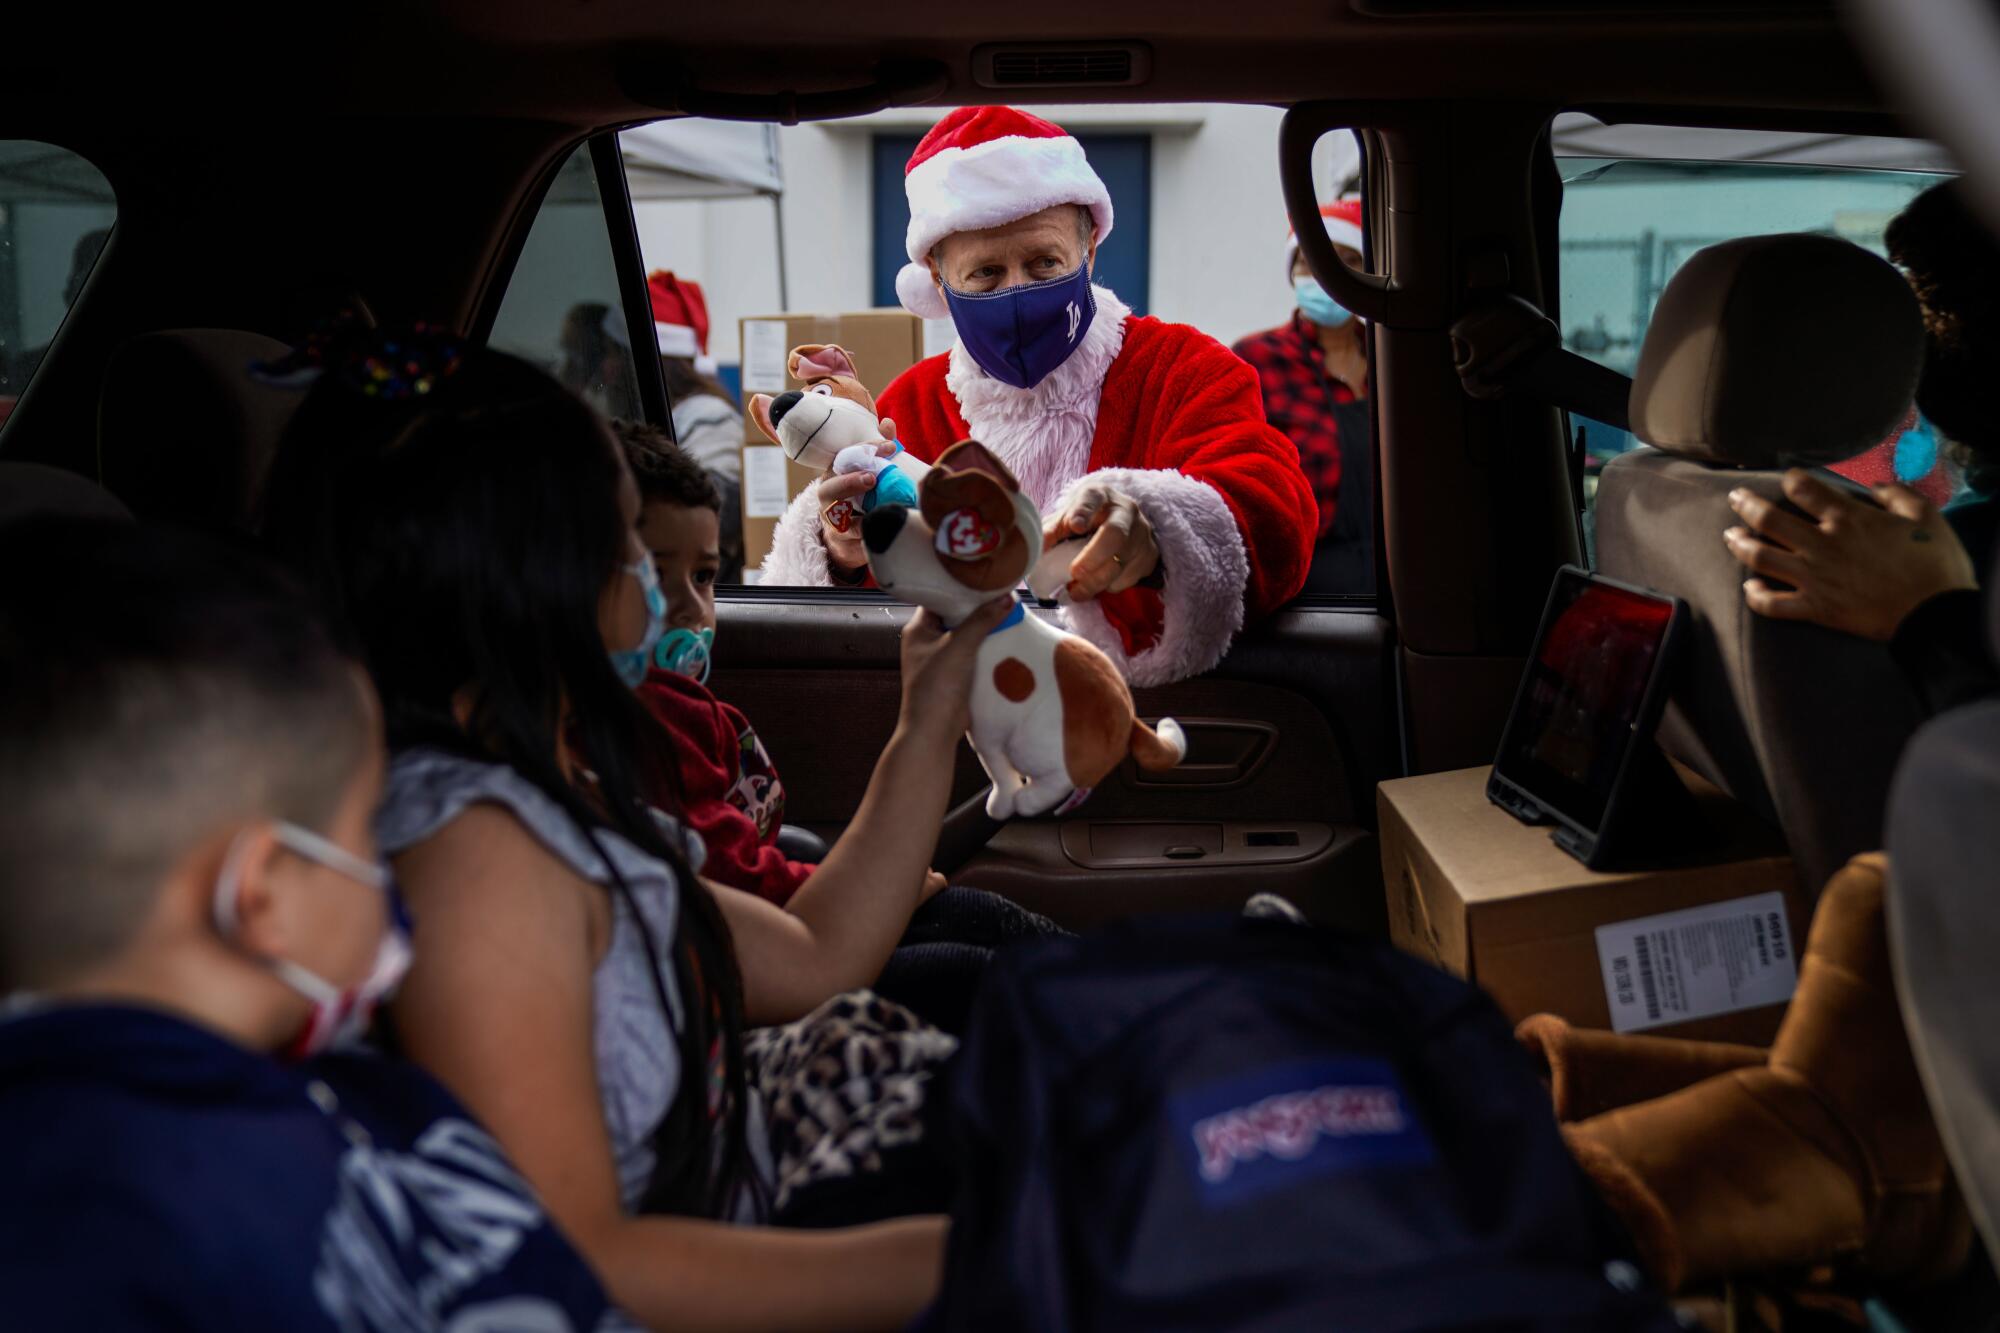 Austin Beutner, dressed as Santa Claus, hands out gifts to kids in a car.